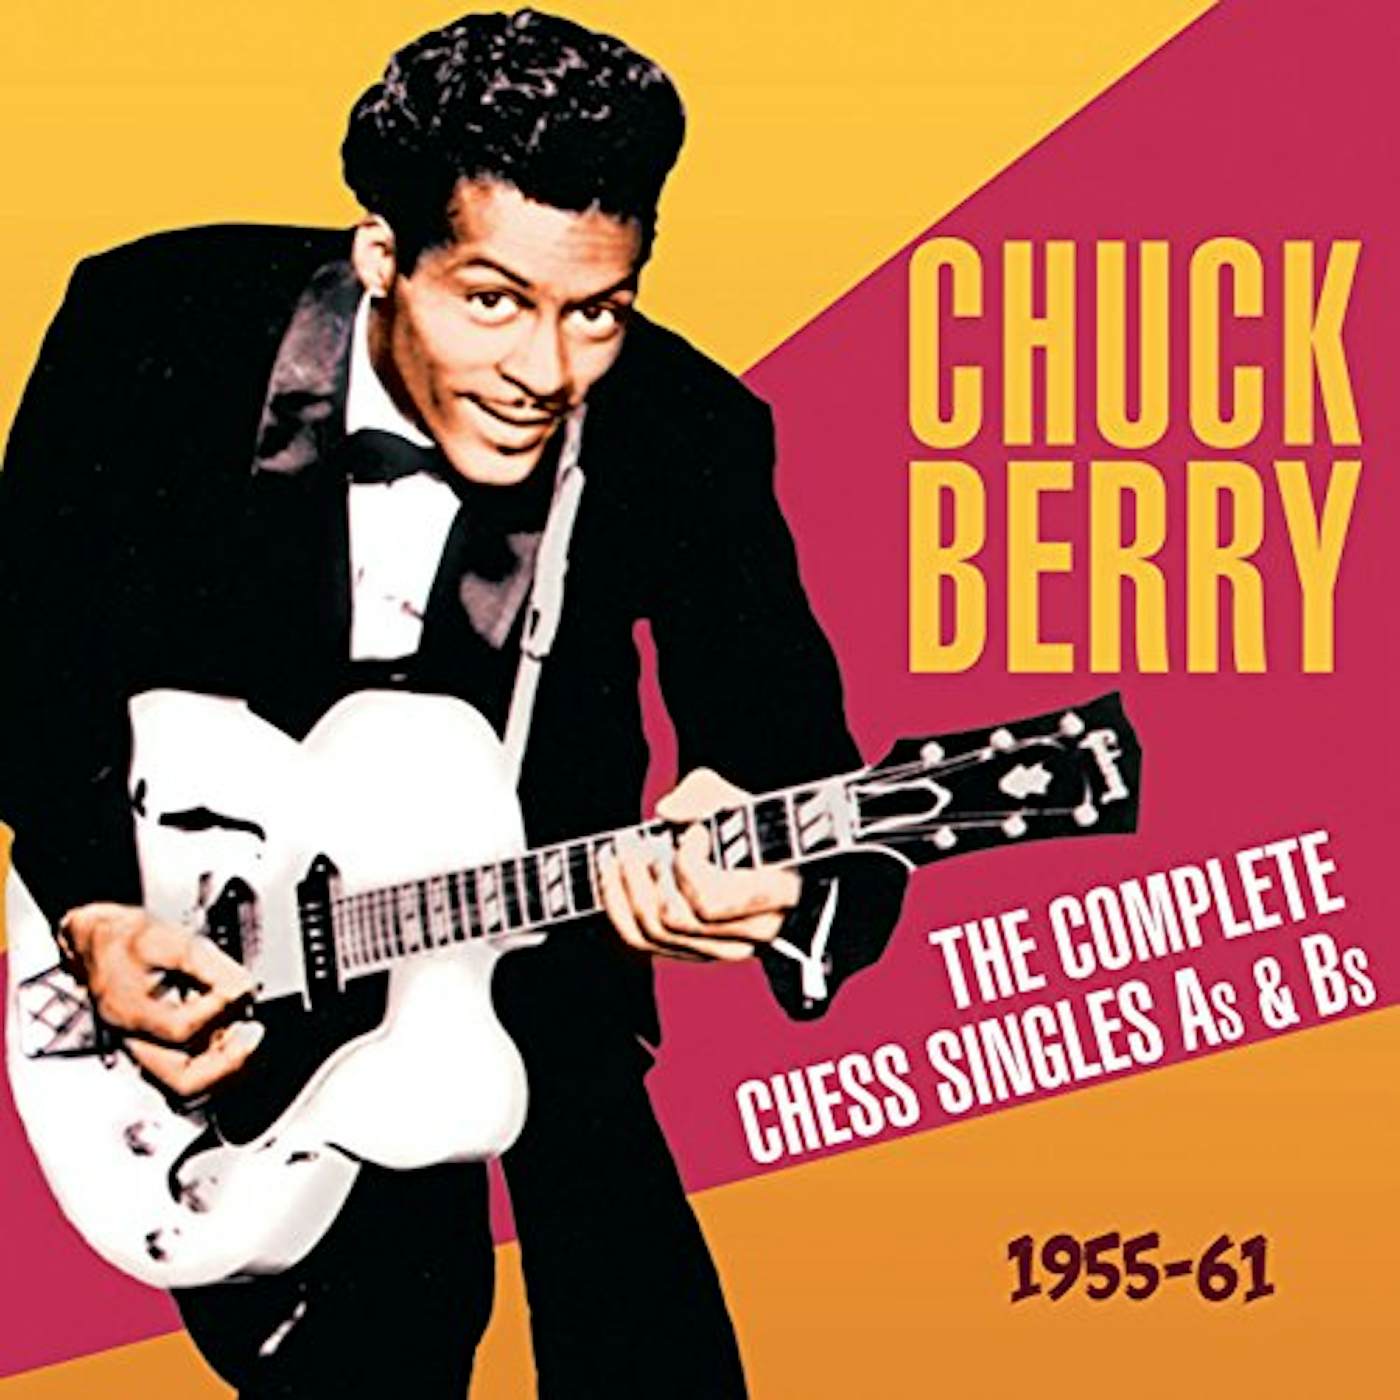 Chuck Berry COMPLETE CHESS SINGLES AS & BS 1955-61 CD